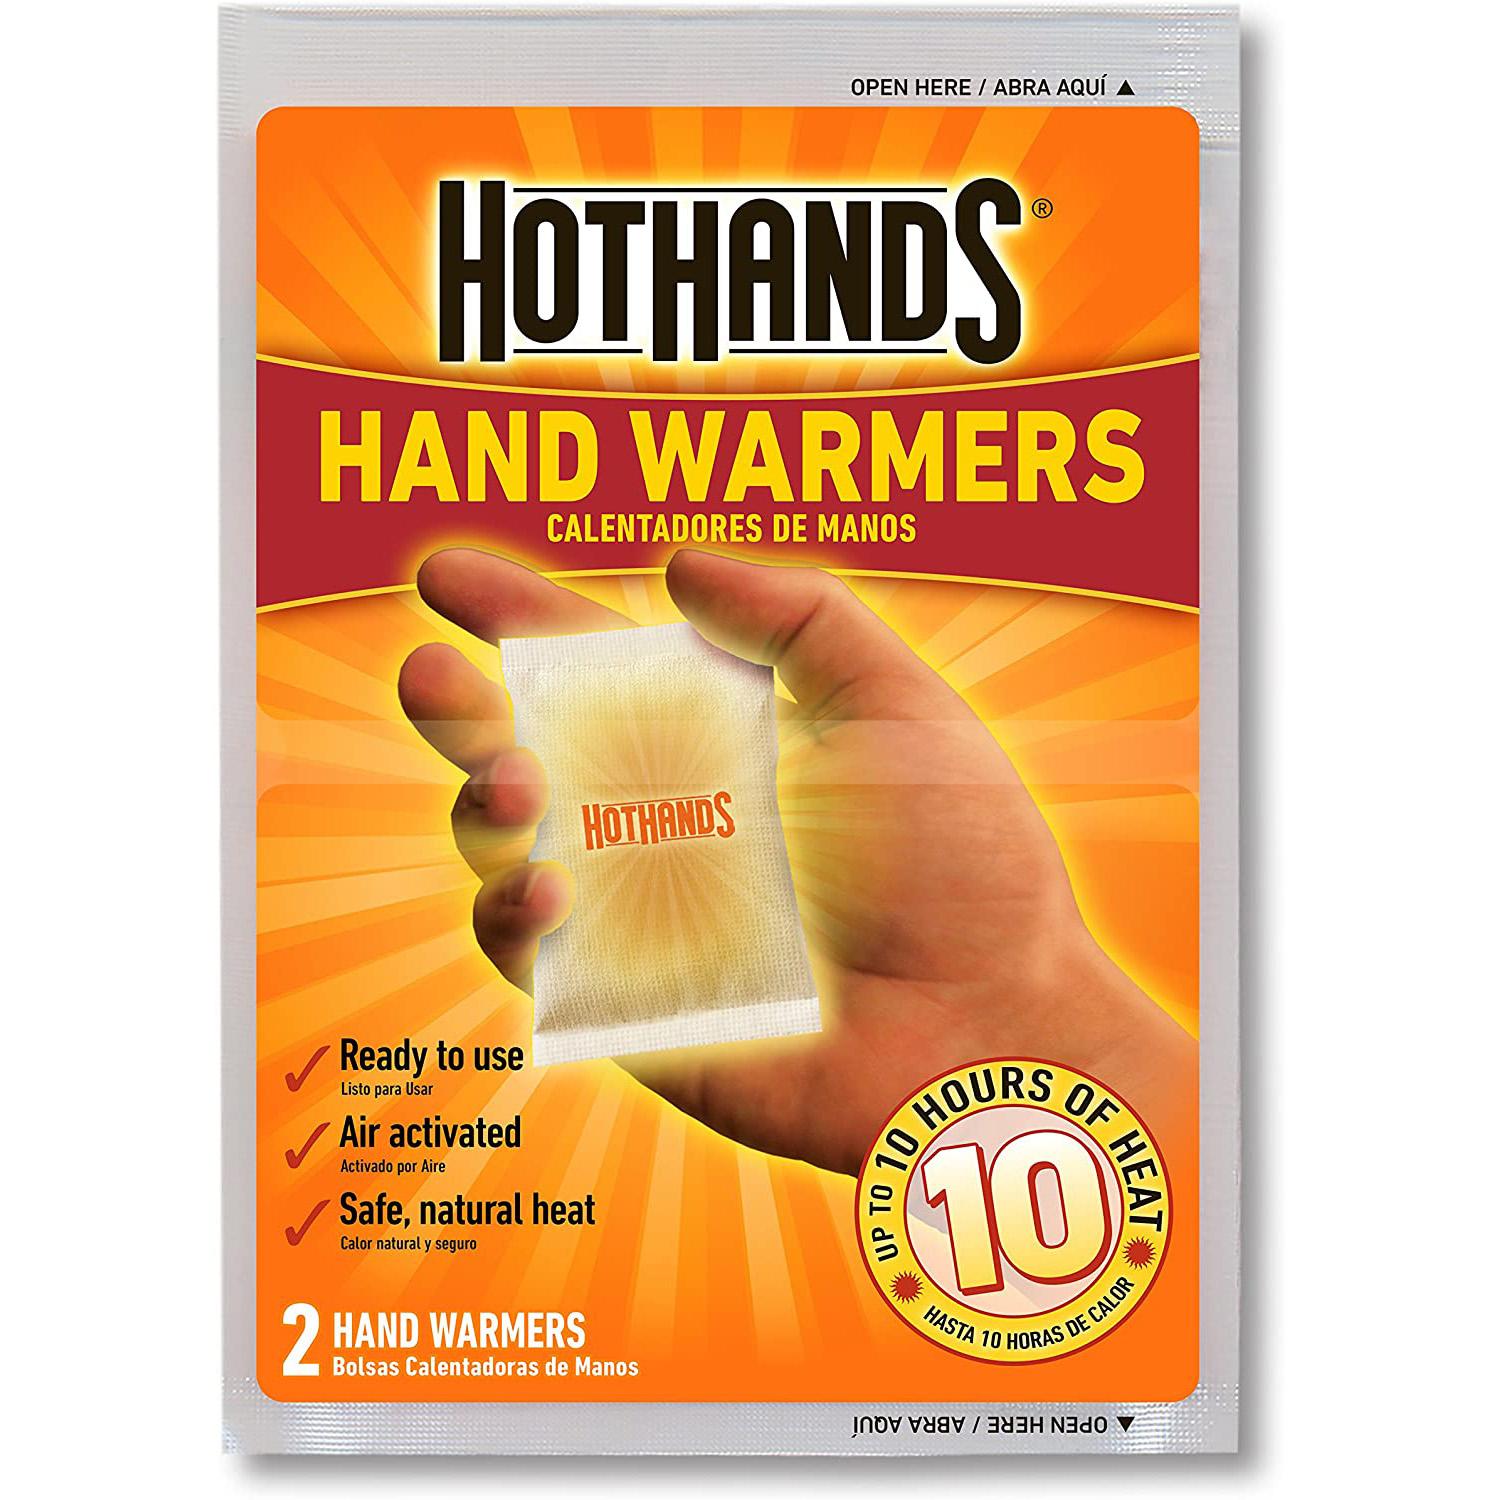 6 HotHands Hand Warmers for $1.97